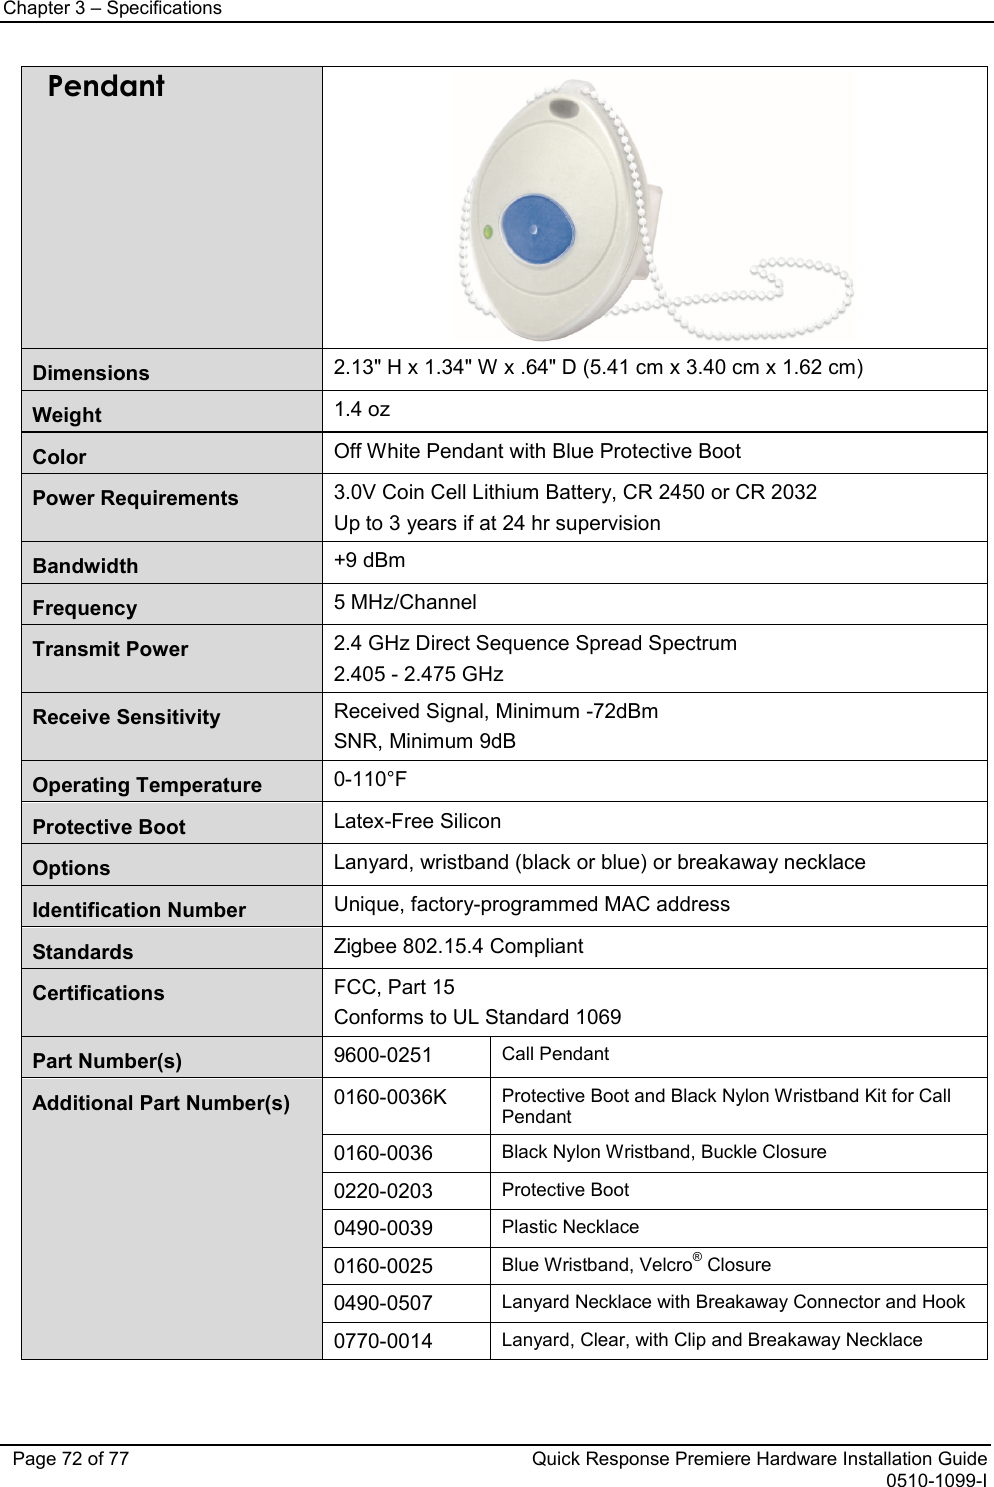 Chapter 3 – Specifications   Page 72 of 77 Quick Response Premiere Hardware Installation Guide 0510-1099-I Pendant  Dimensions 2.13&quot; H x 1.34&quot; W x .64&quot; D (5.41 cm x 3.40 cm x 1.62 cm) Weight 1.4 oz Color Off White Pendant with Blue Protective Boot Power Requirements 3.0V Coin Cell Lithium Battery, CR 2450 or CR 2032 Up to 3 years if at 24 hr supervision Bandwidth +9 dBm Frequency  5 MHz/Channel Transmit Power 2.4 GHz Direct Sequence Spread Spectrum 2.405 - 2.475 GHz Receive Sensitivity Received Signal, Minimum -72dBm SNR, Minimum 9dB Operating Temperature 0-110°F Protective Boot Latex-Free Silicon Options Lanyard, wristband (black or blue) or breakaway necklace Identification Number Unique, factory-programmed MAC address Standards Zigbee 802.15.4 Compliant Certifications FCC, Part 15 Conforms to UL Standard 1069 Part Number(s)  9600-0251 Call Pendant Additional Part Number(s) 0160-0036K Protective Boot and Black Nylon Wristband Kit for Call Pendant 0160-0036 Black Nylon Wristband, Buckle Closure 0220-0203 Protective Boot 0490-0039 Plastic Necklace 0160-0025 Blue Wristband, Velcro® Closure 0490-0507 Lanyard Necklace with Breakaway Connector and Hook 0770-0014 Lanyard, Clear, with Clip and Breakaway Necklace     